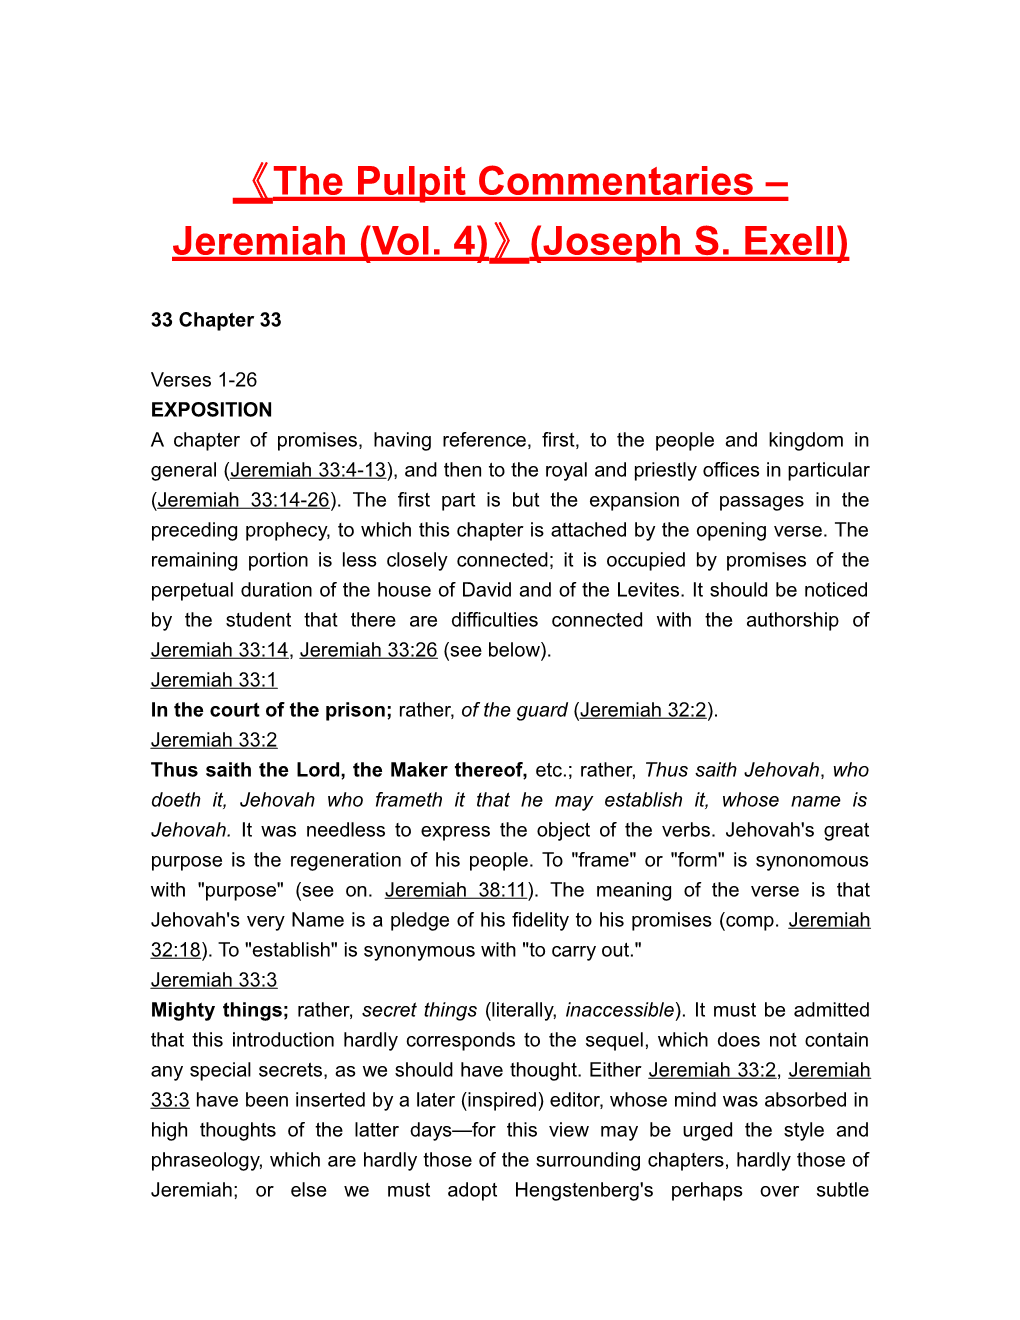 The Pulpit Commentaries Jeremiah (Vol. 4) (Joseph S. Exell)